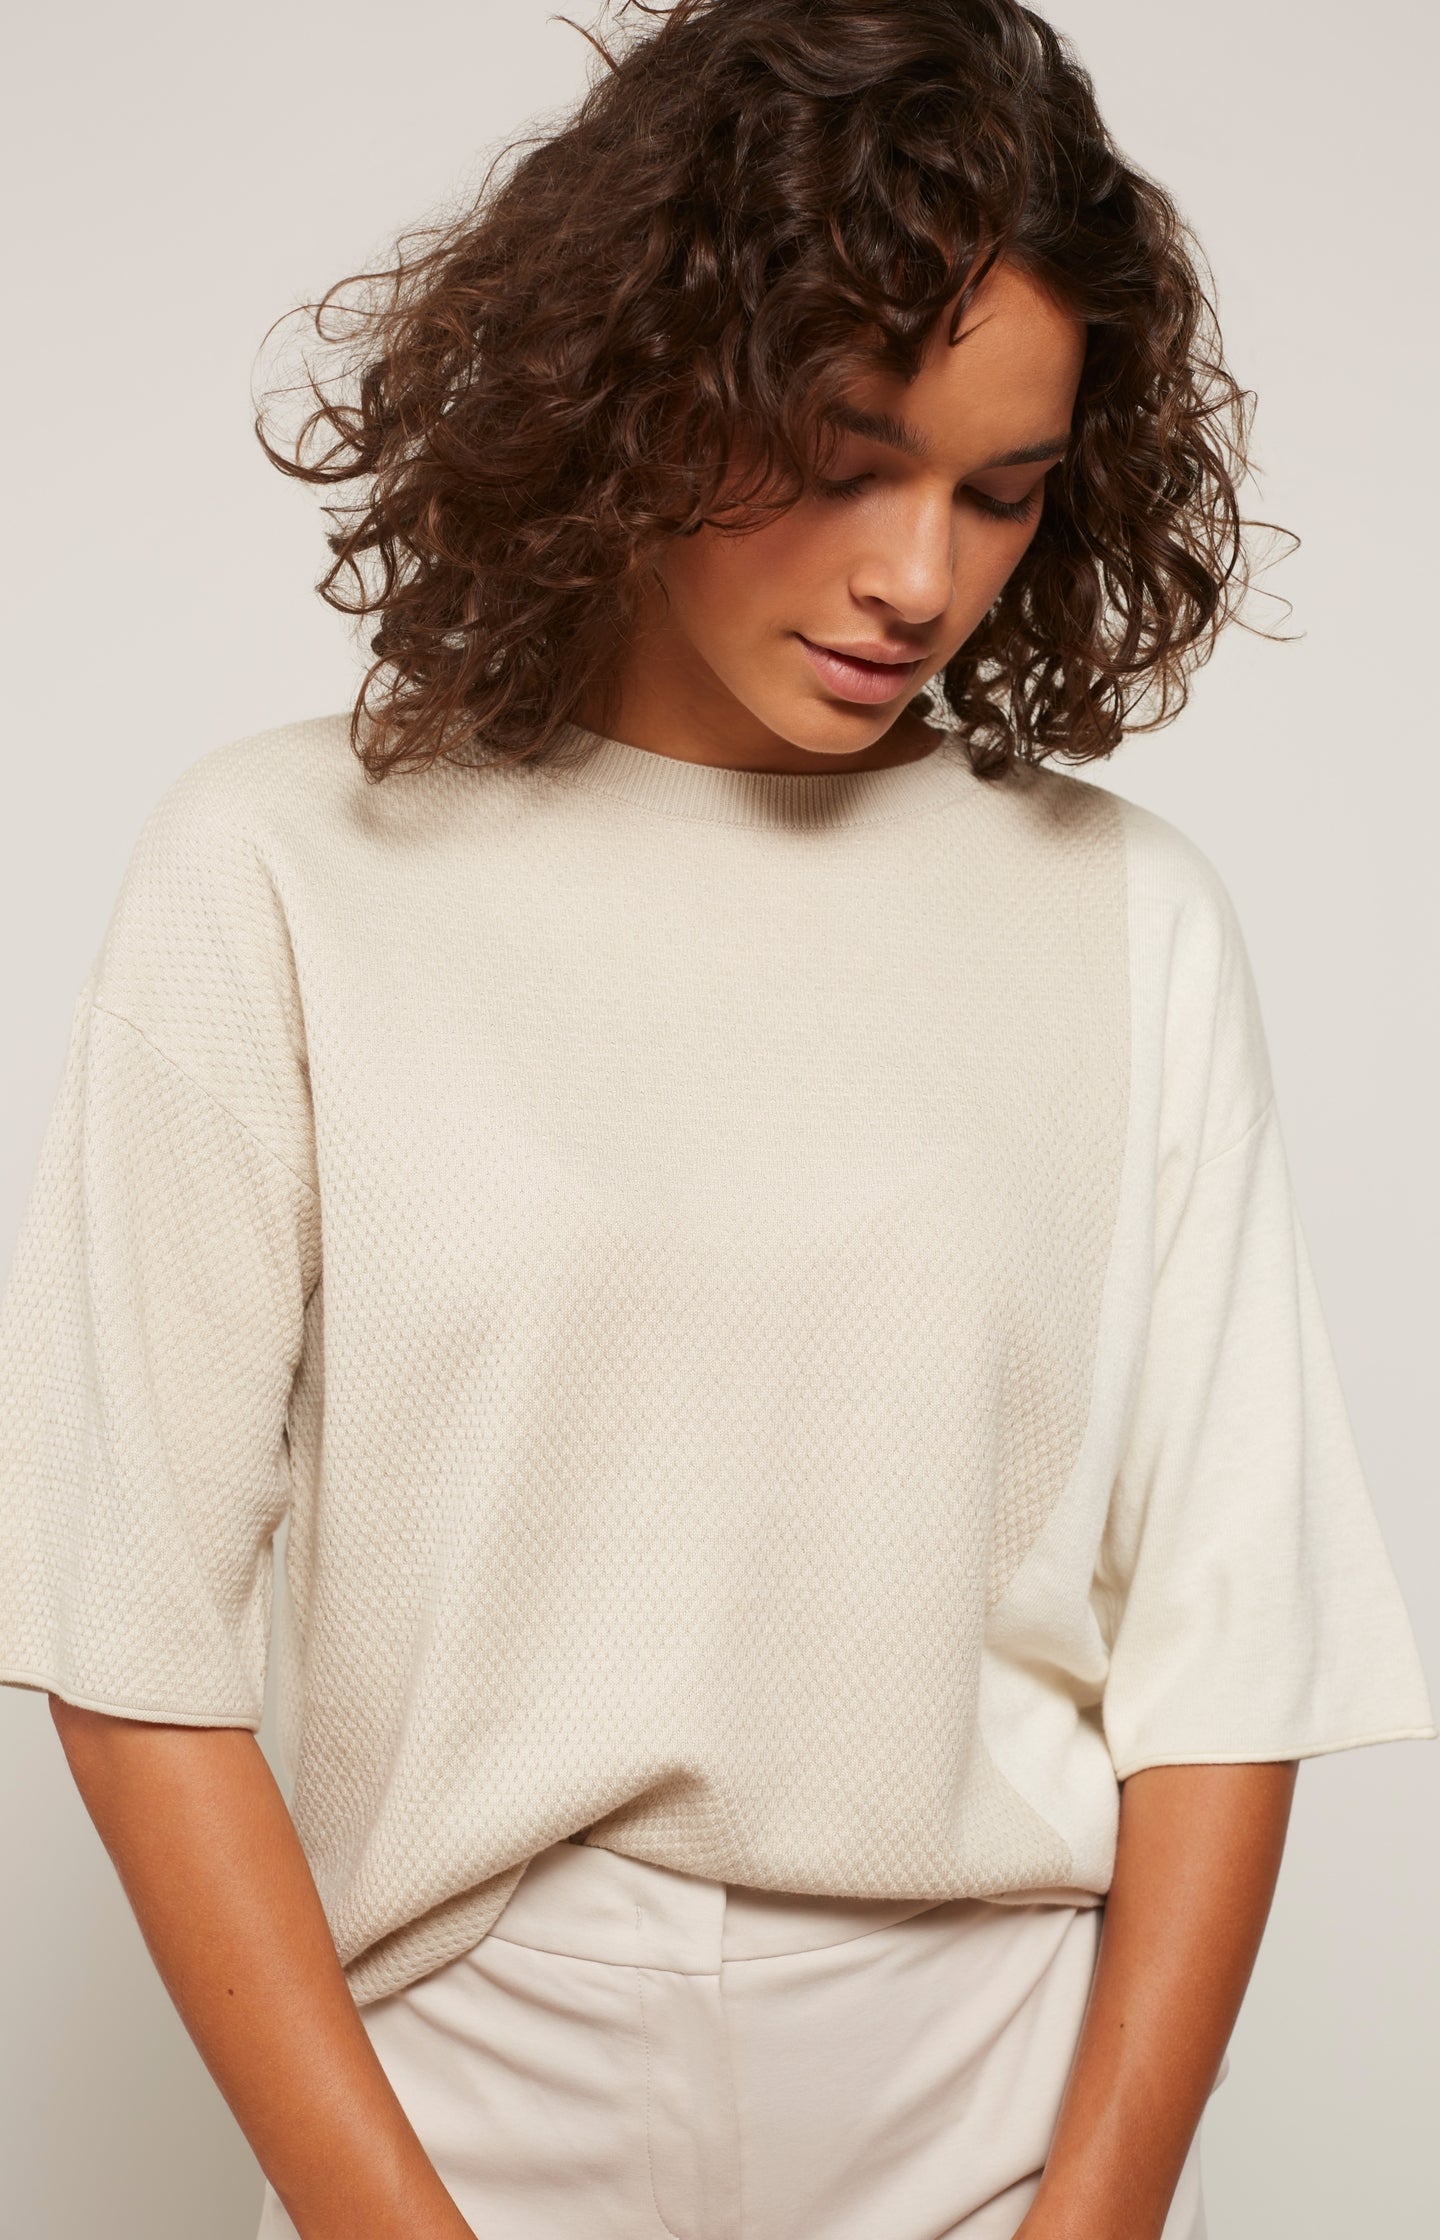 Colorblock sweater with round neck and mid-length sleeves - Type: lookbook